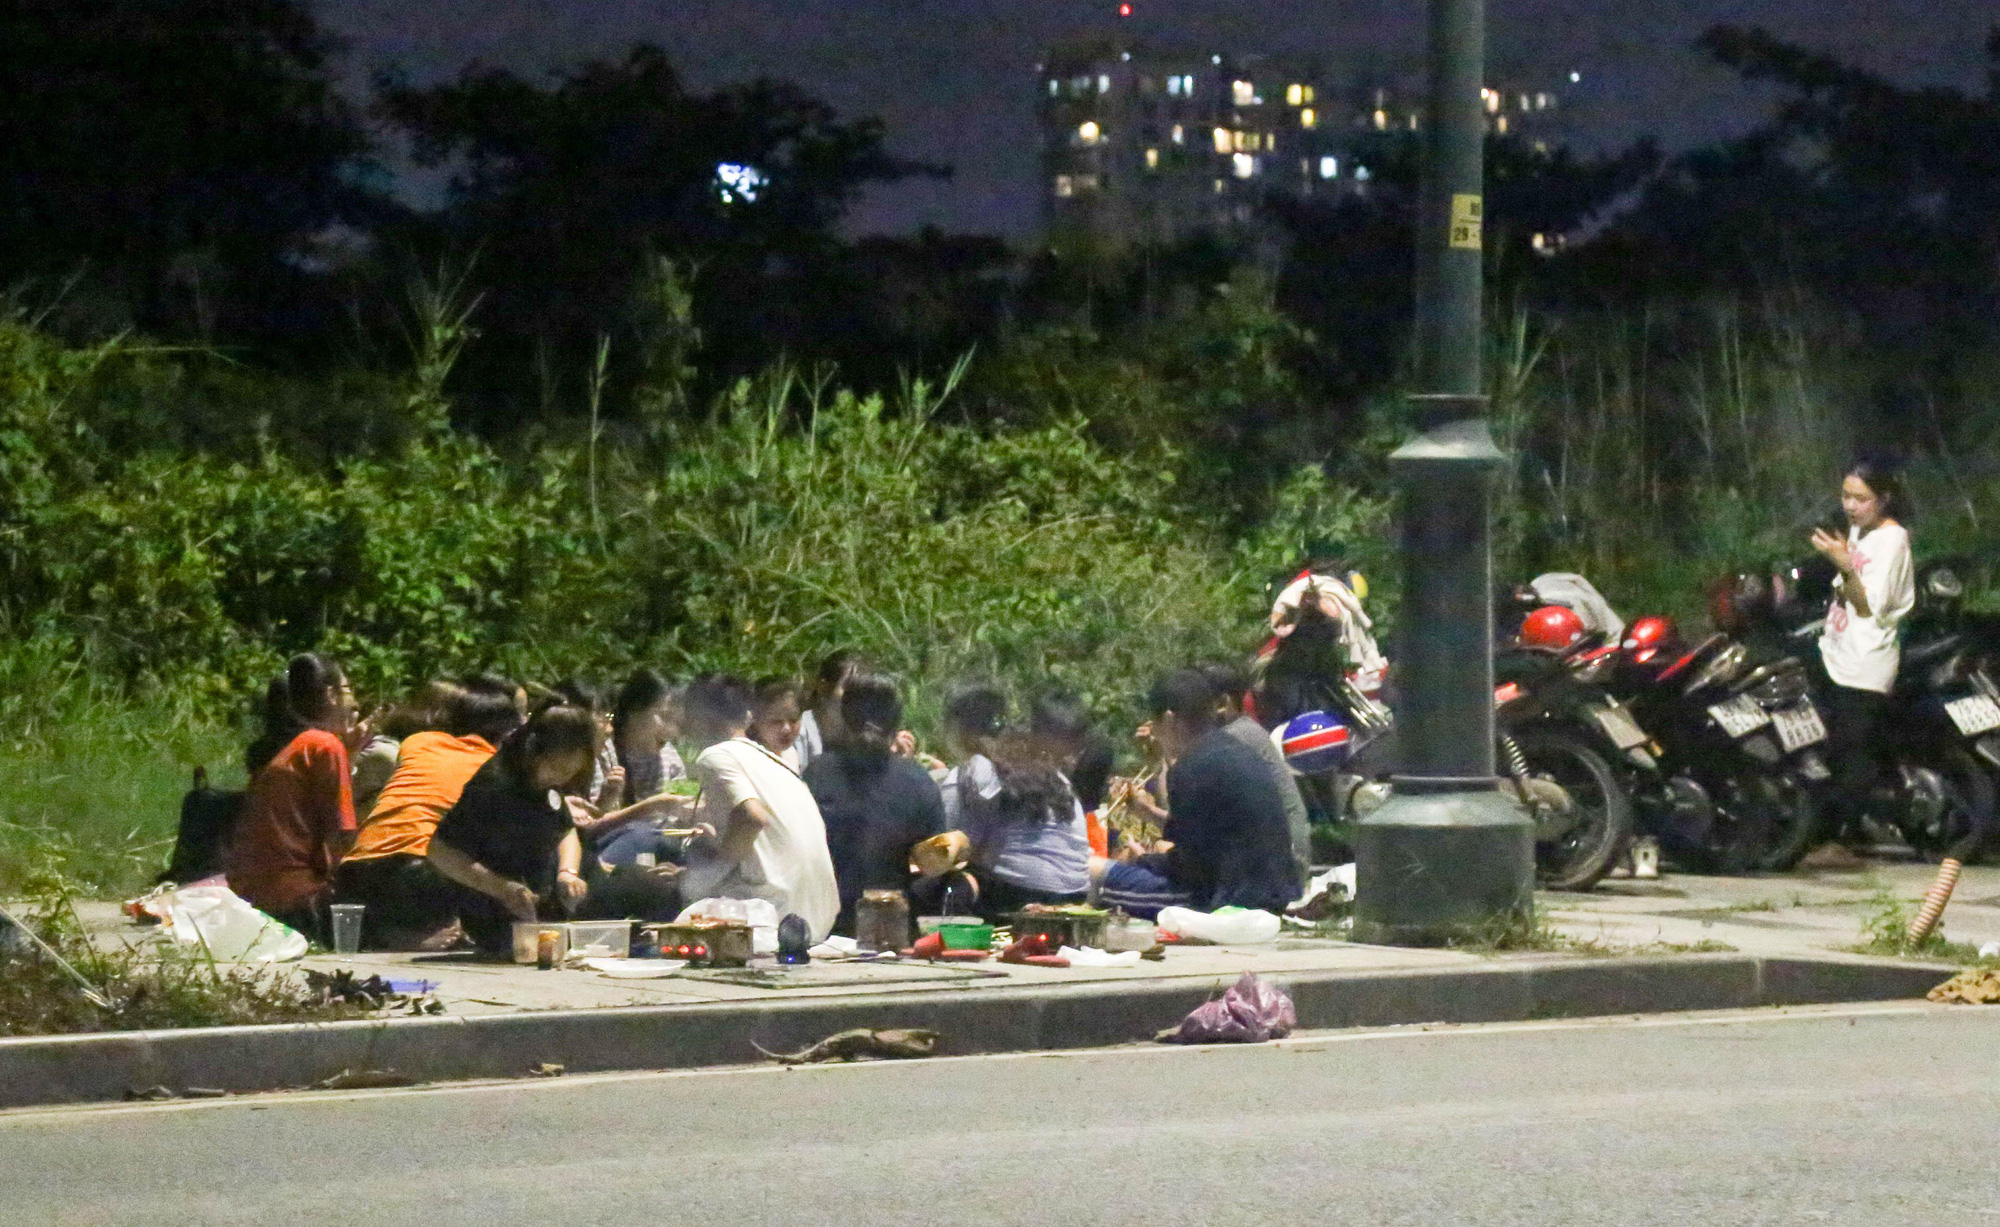 Roadside BBQ parties a headache in Ho Chi Minh City’s new urban area